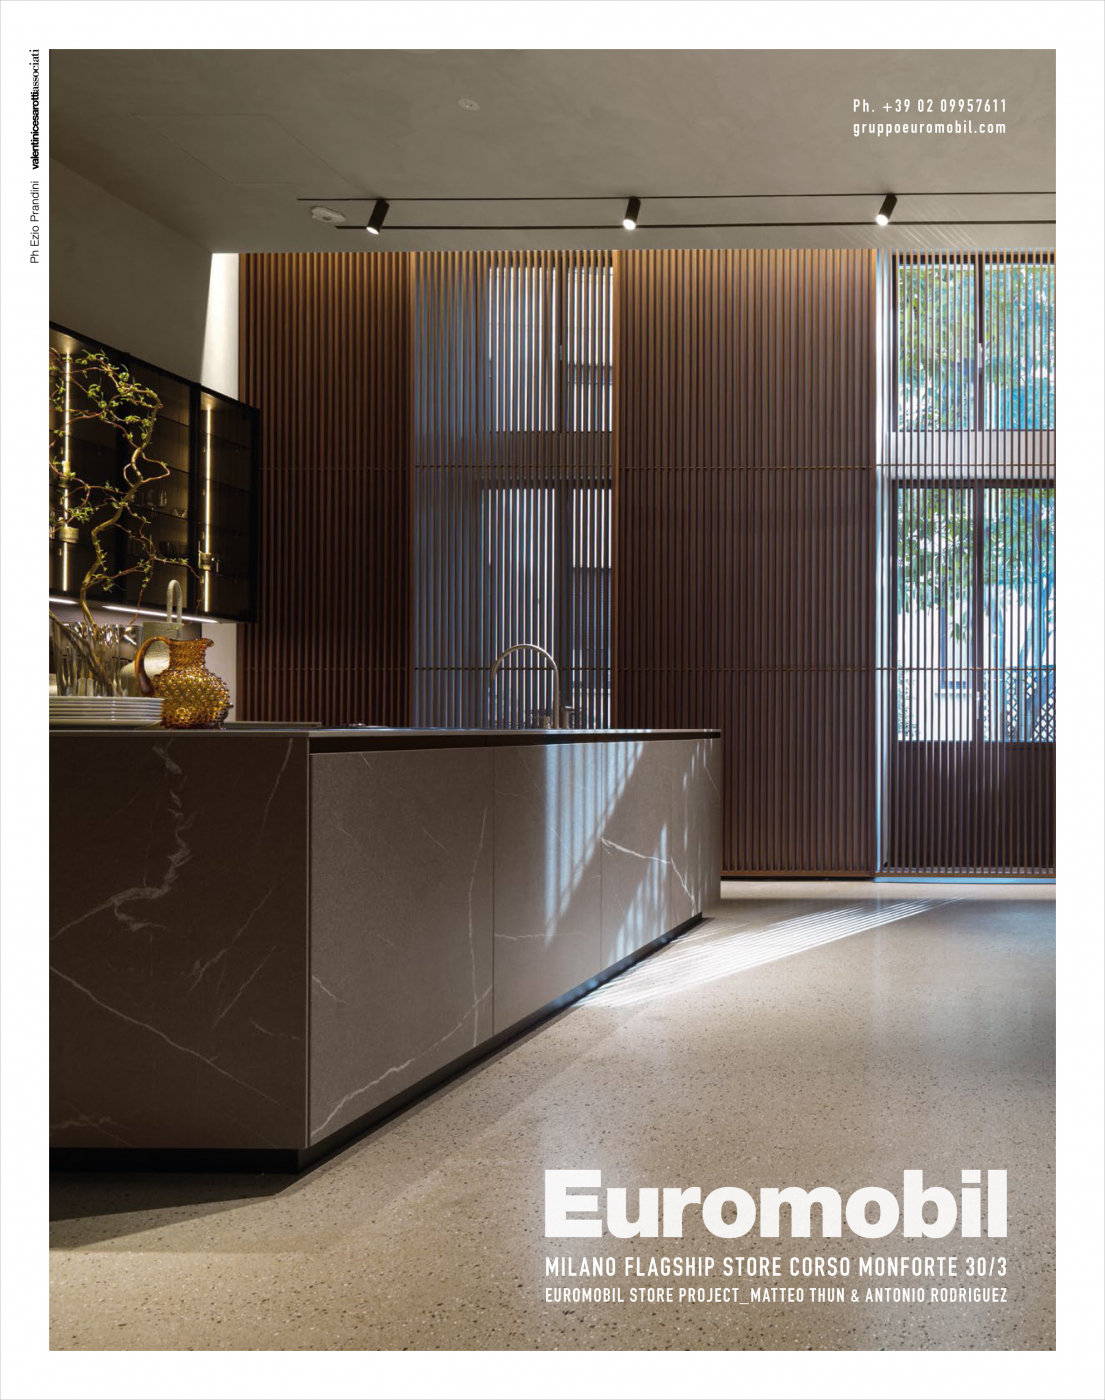 FLAGSHIP STORE EUROMOBIL